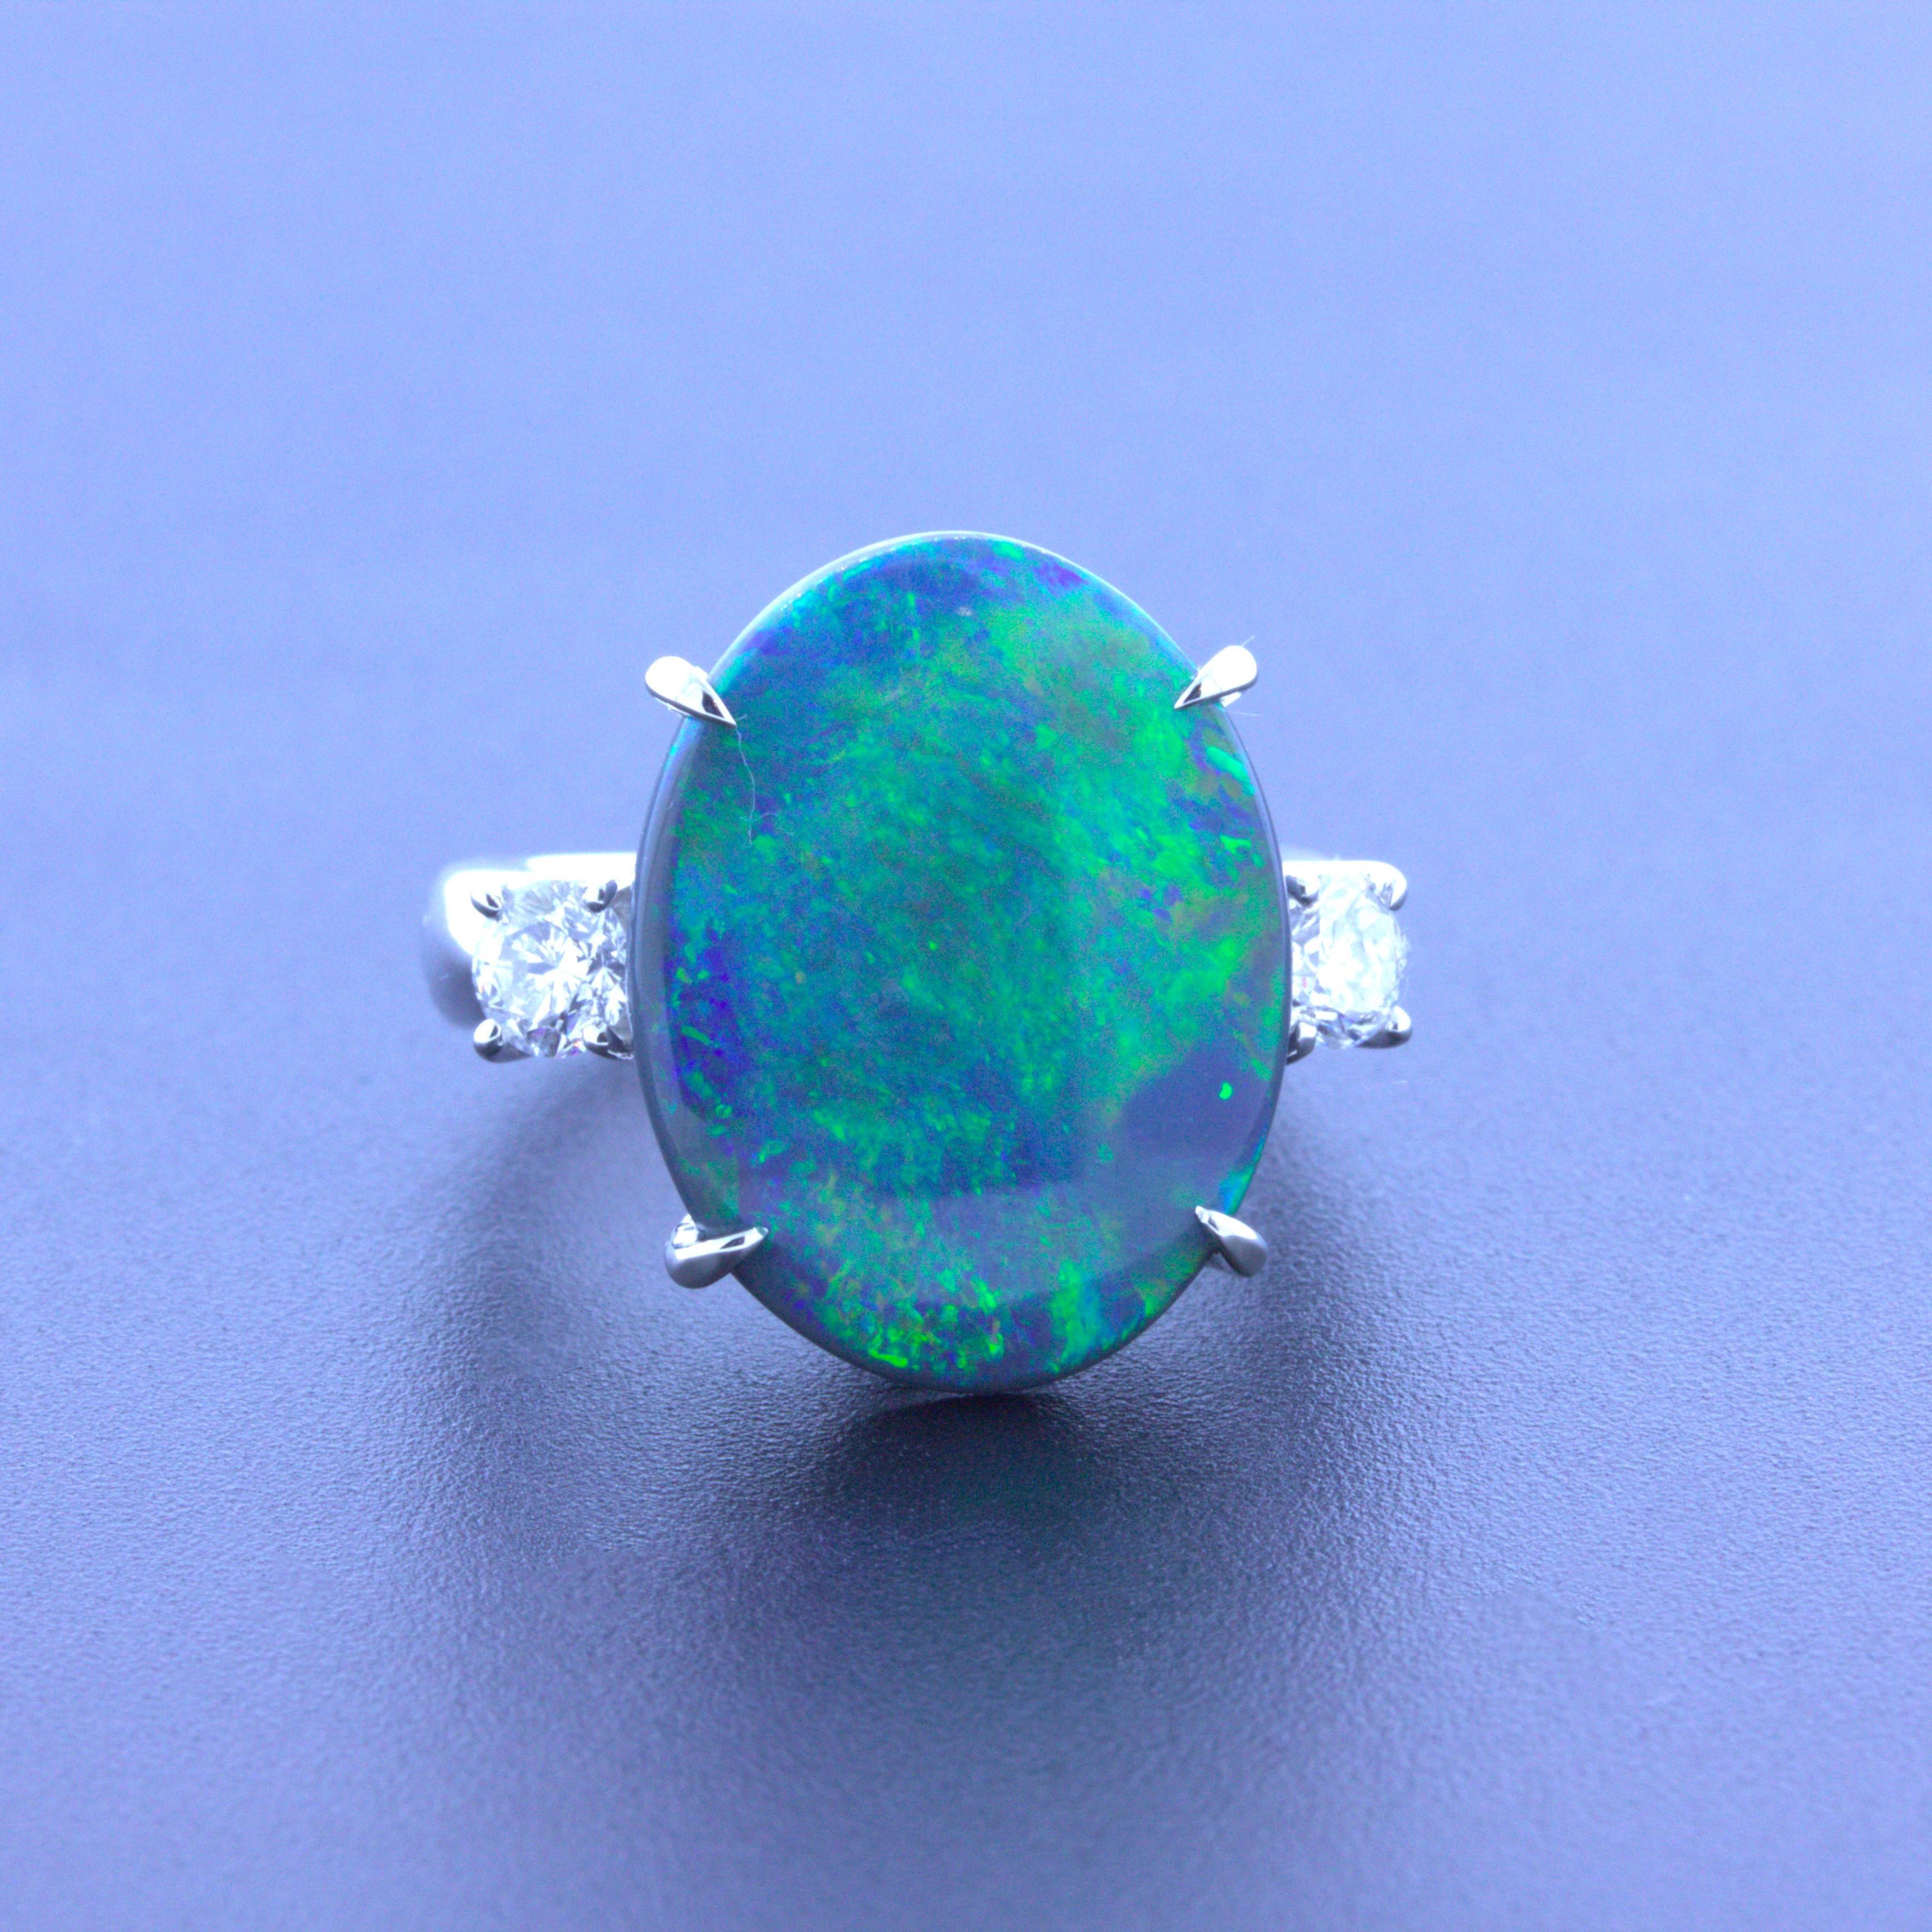 A classic 3-stone ring featuring a natural Australian black opal. It weighs 7.92 carats and has beautiful play-of-color as flashes of green, blue, yellow, and orange all dance across the stone as it is moved across the light. It is complemented by 2